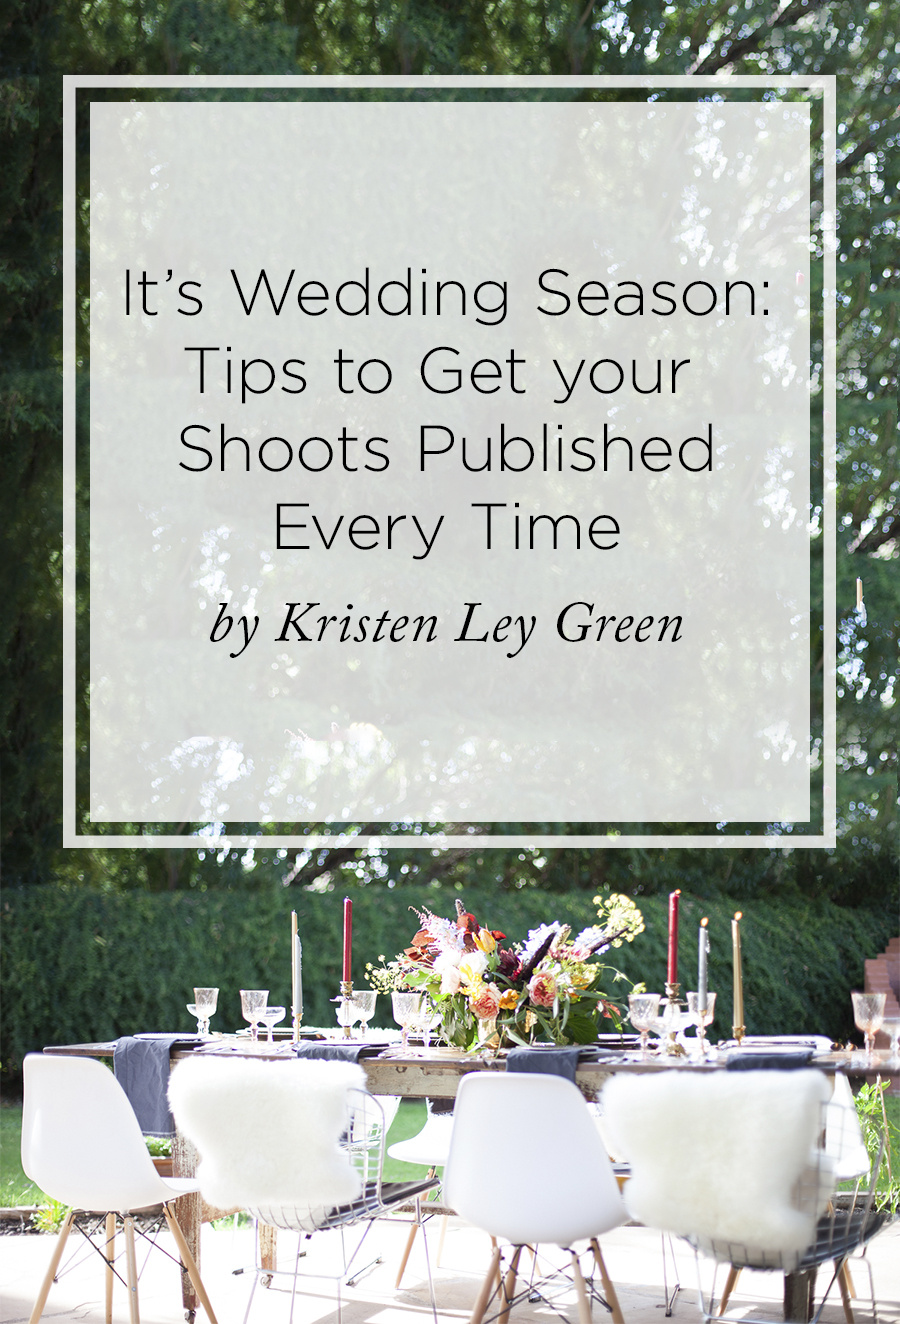 Tips for getting your weddings and shoots published every time